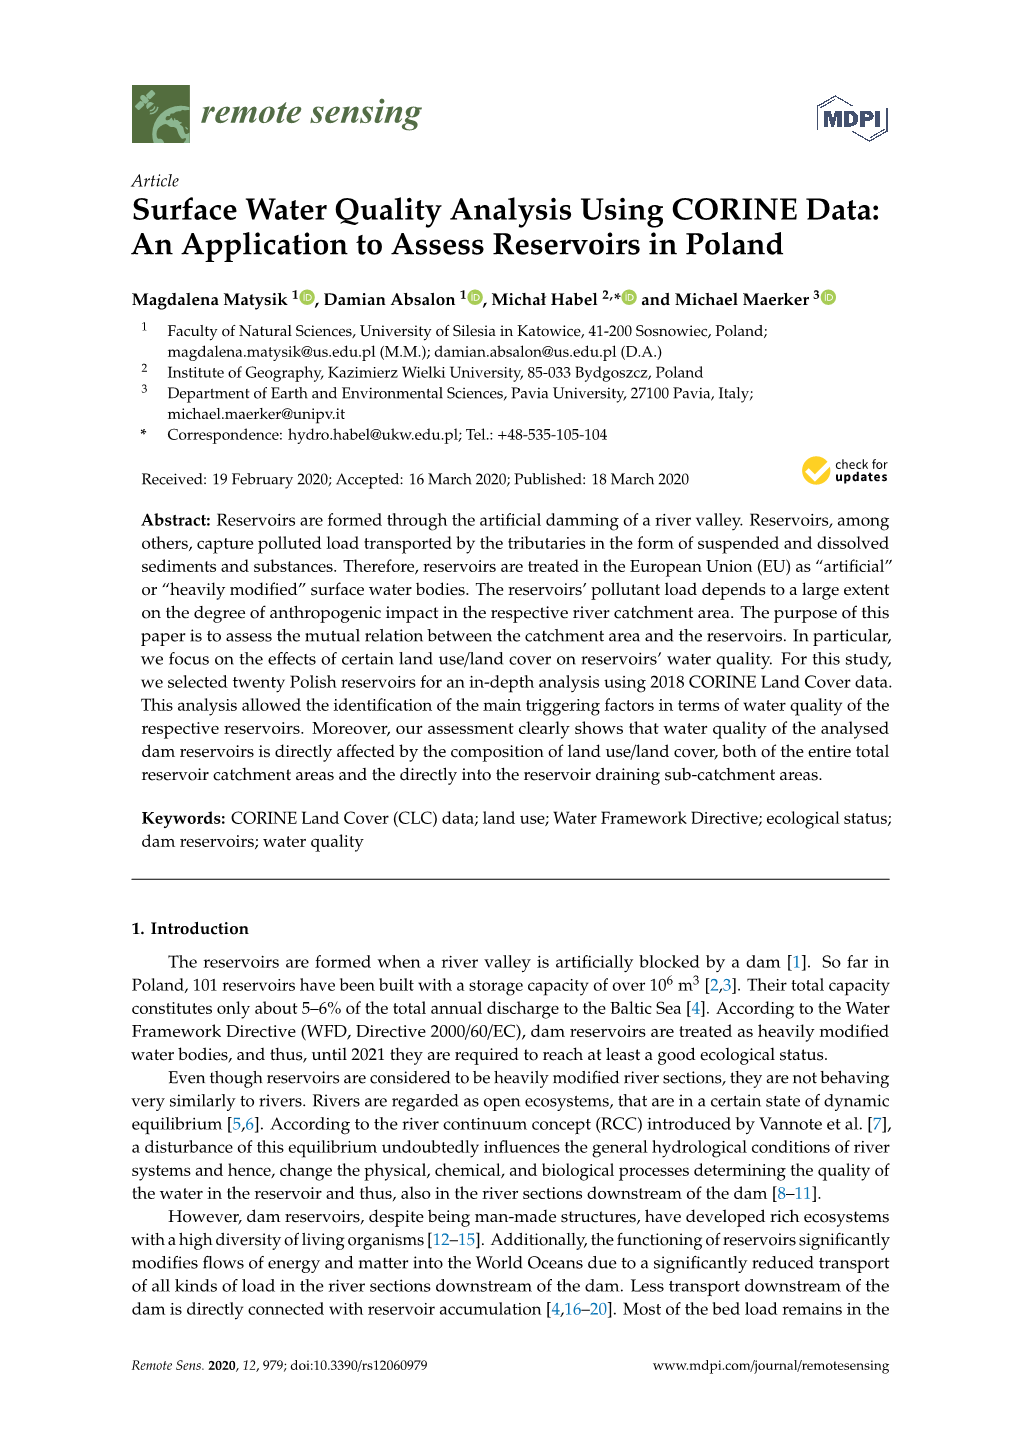 Surface Water Quality Analysis Using CORINE Data: an Application to Assess Reservoirs in Poland